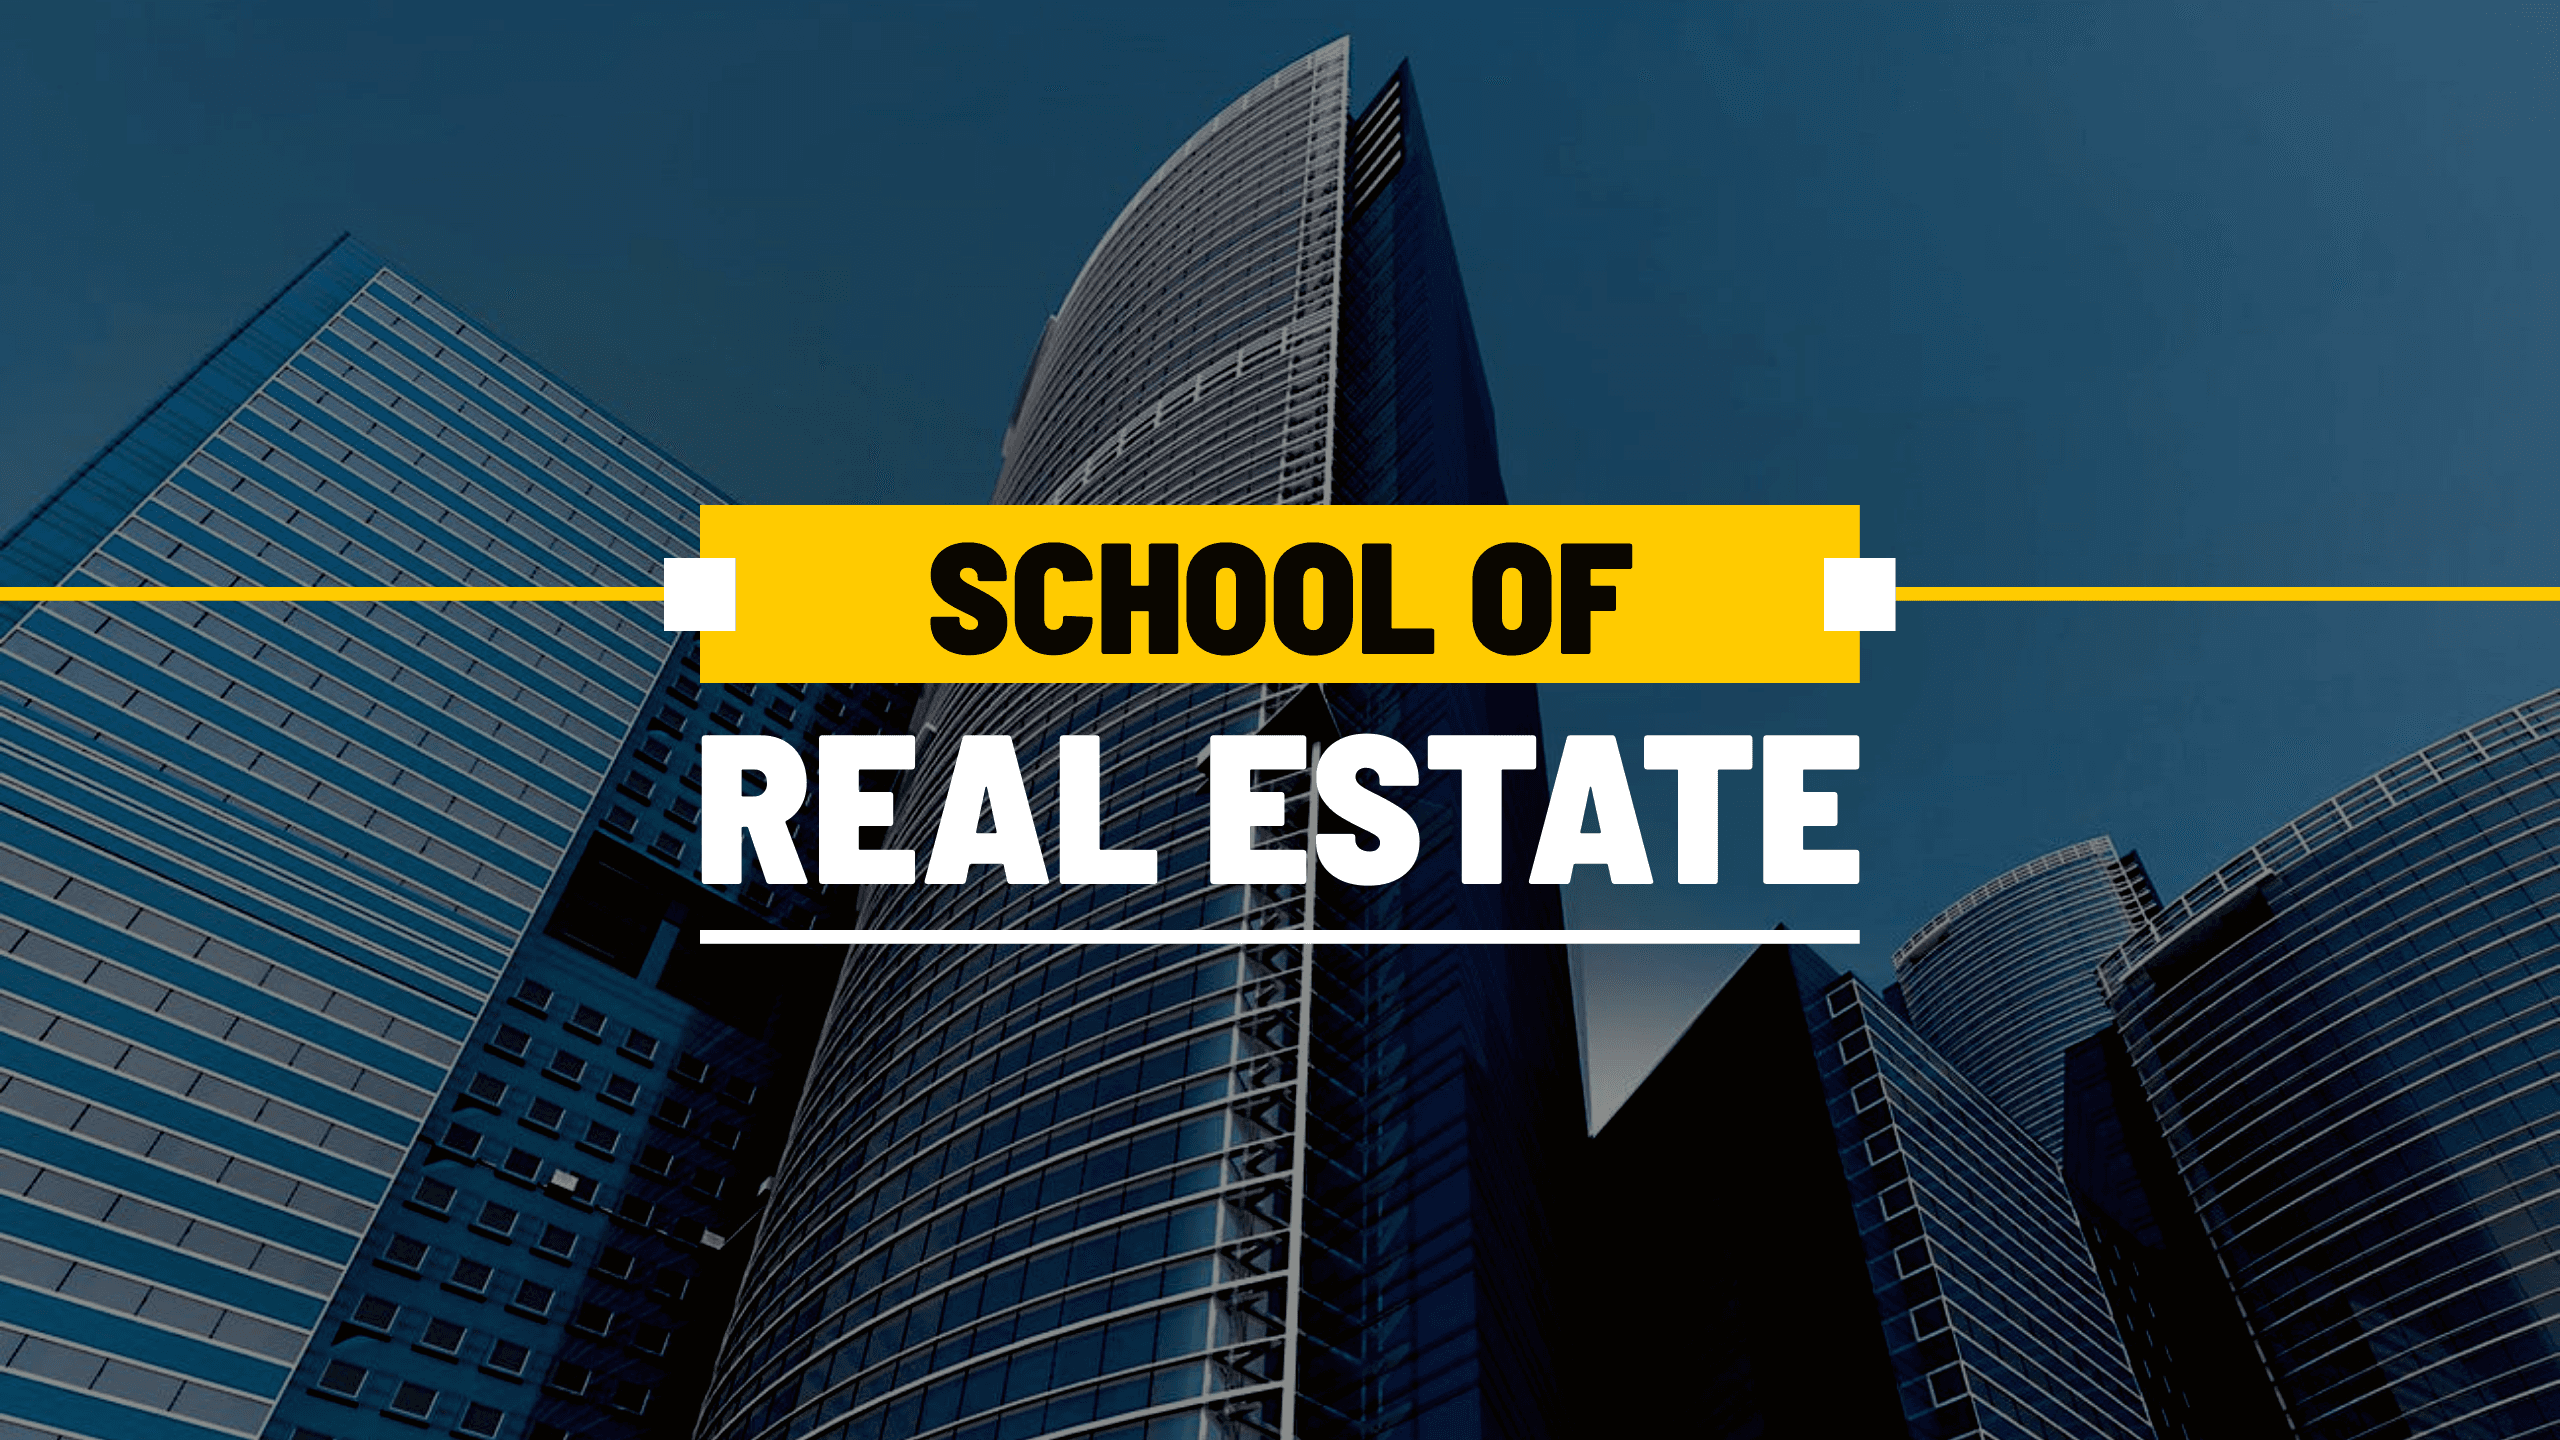 skyscraper-buildings-and-school-of-real-estate-blue-background-youtube-channel-art-thumbnail-img